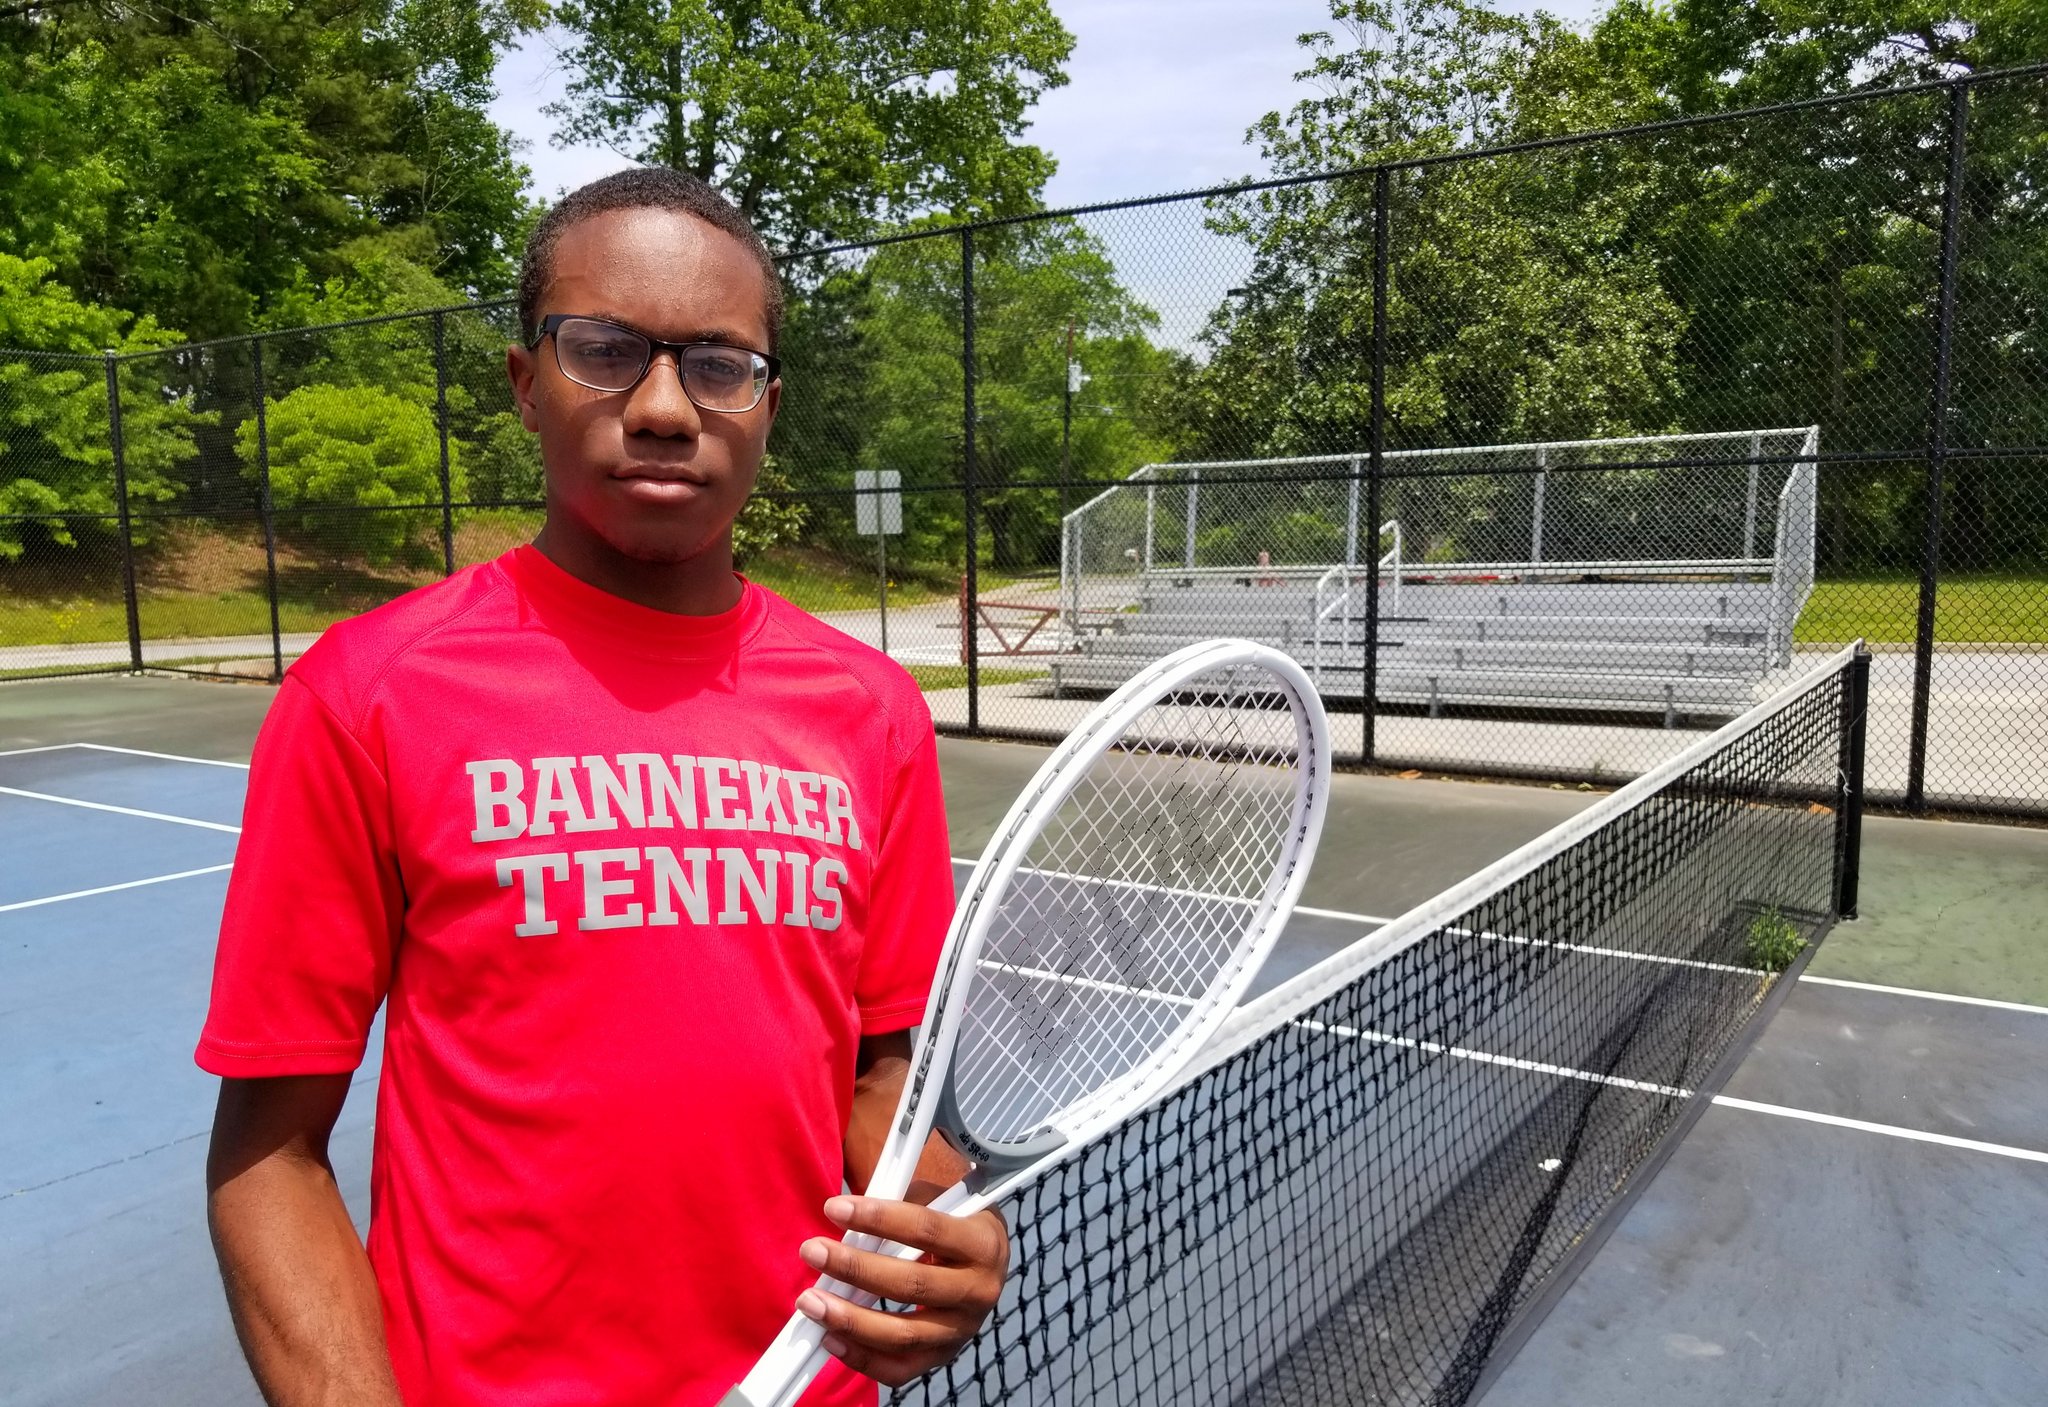 After Undefeated, History-Making Season, Banneker Retires Hall’s Racket